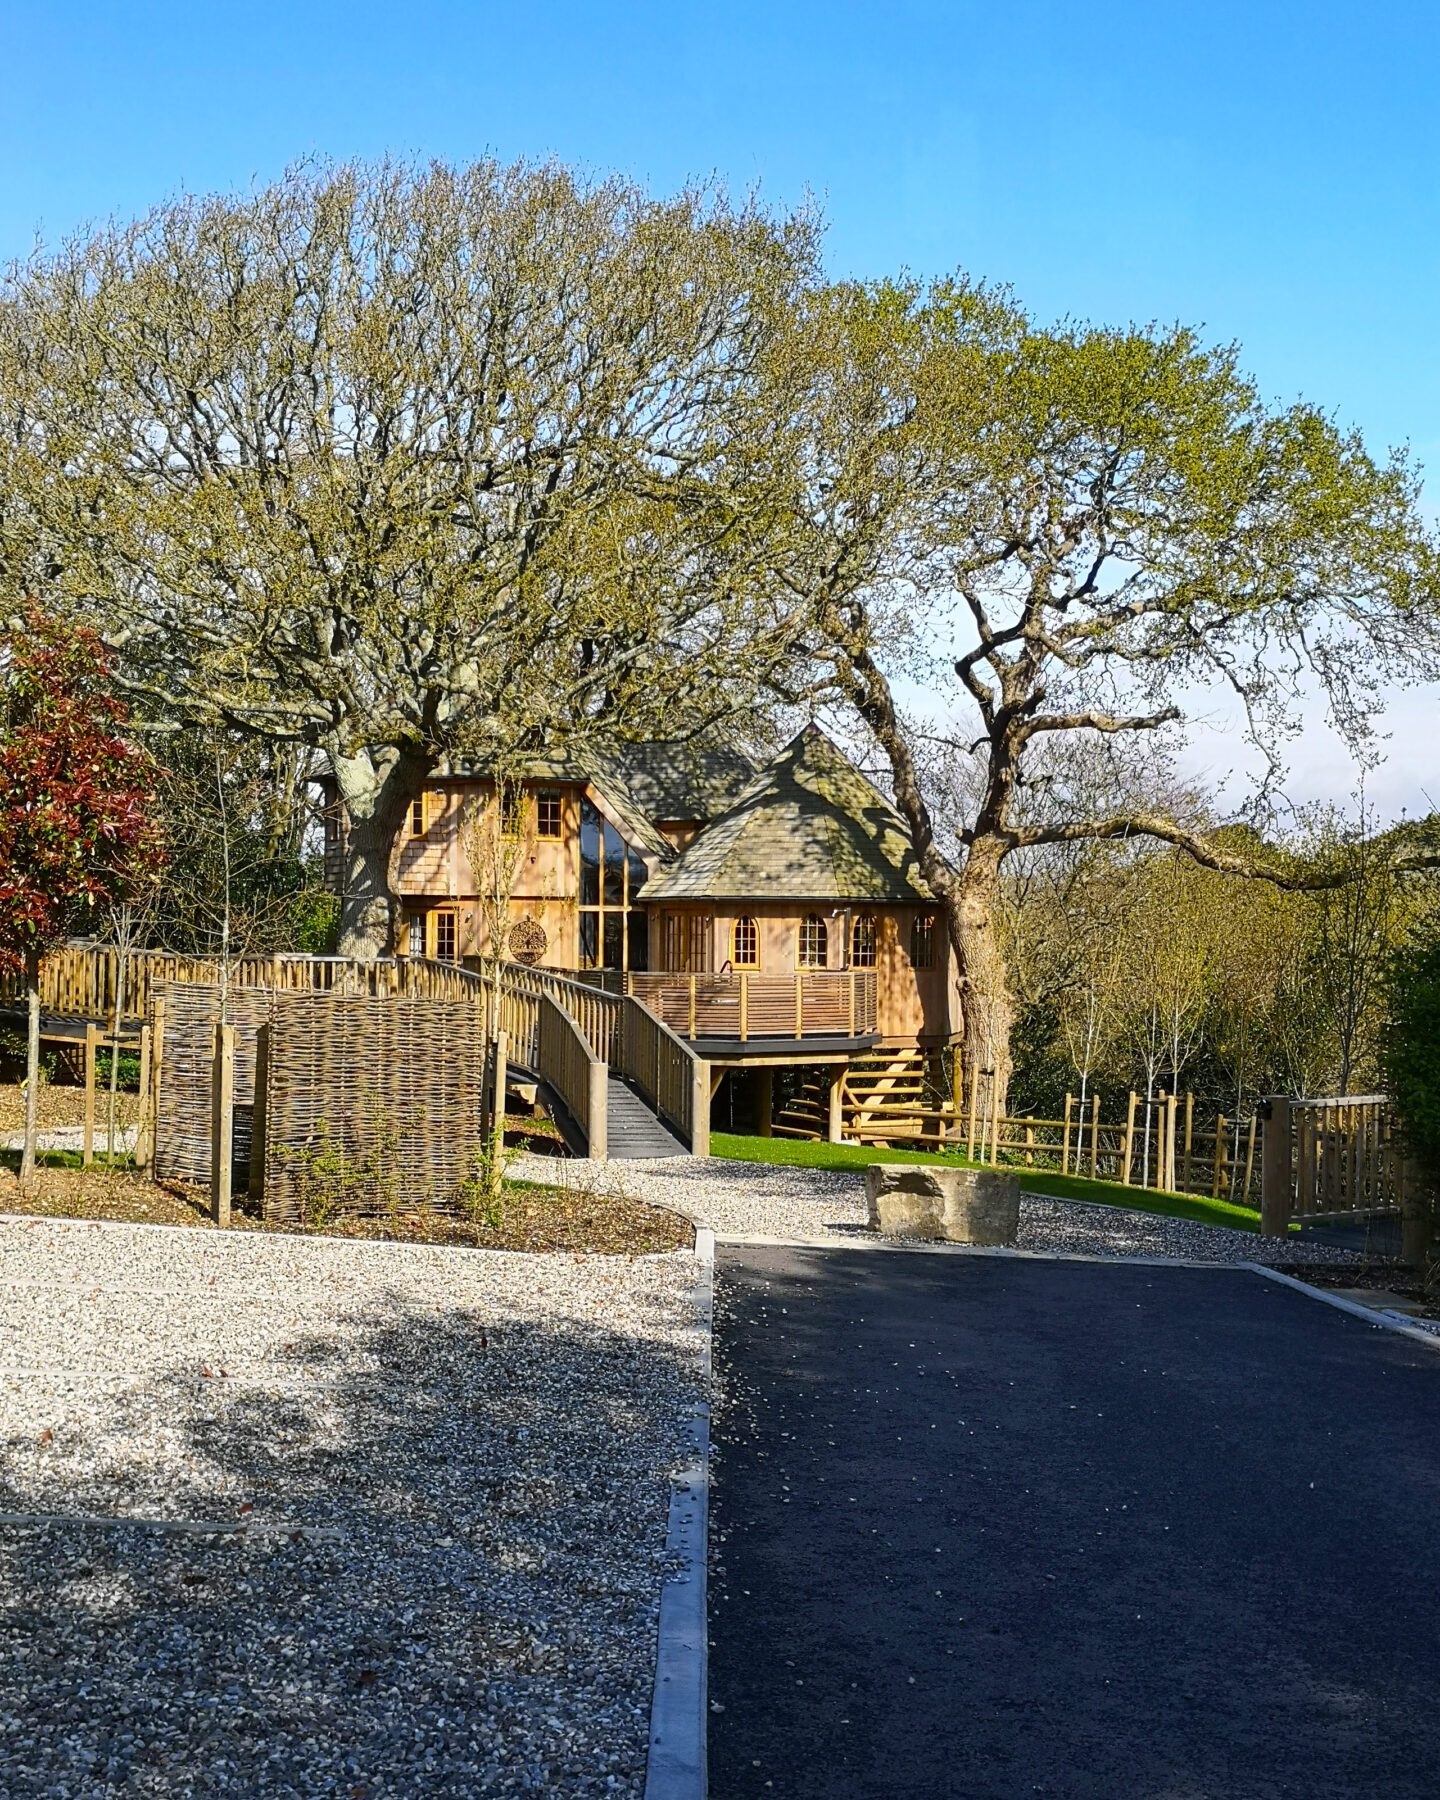  Shorefield Country Park, Shorefield Holidays, Self-catering Lodges, Holidays Park, Signature Lodge, Hot Tube, Dorset, Hampshire, Holiday Accommodation, Easter Break, Family-Friendly, Travel Reviews, Family Review, the Frenchie Mummy , Family holidays